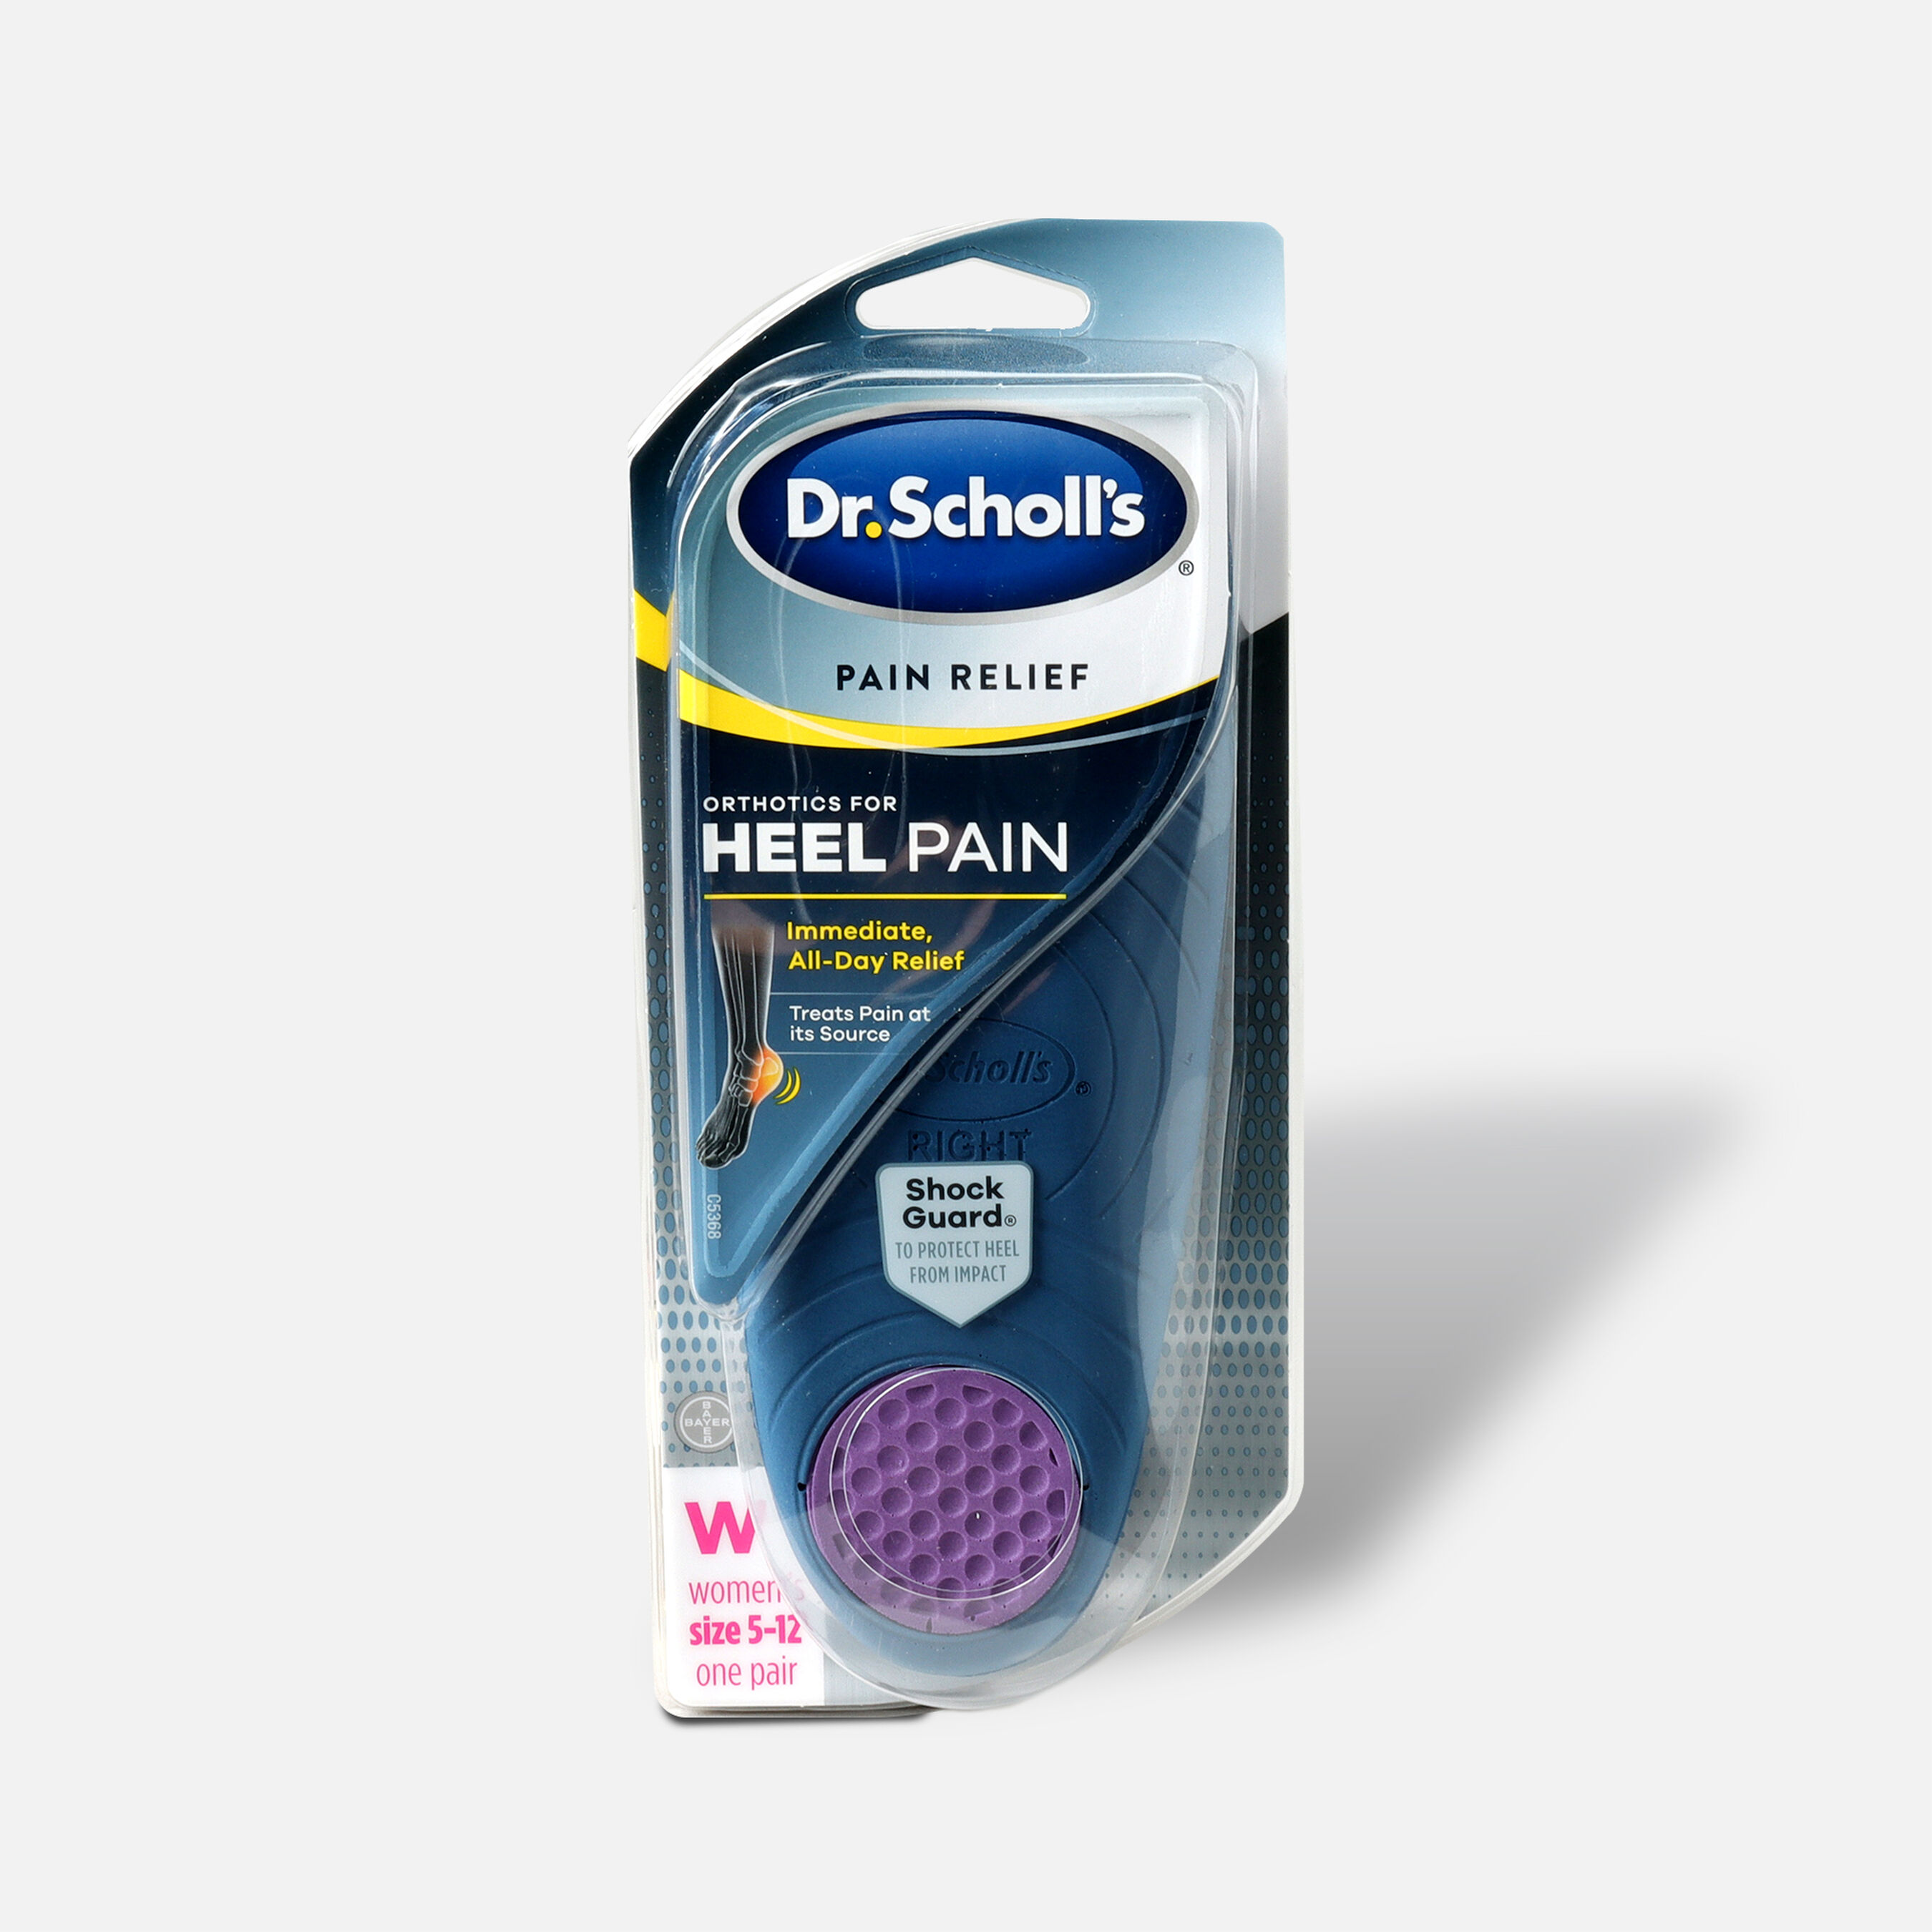 Dr. Scholl's Pain Relief Orthotics For Heel Pain For Women - Size (5-12)